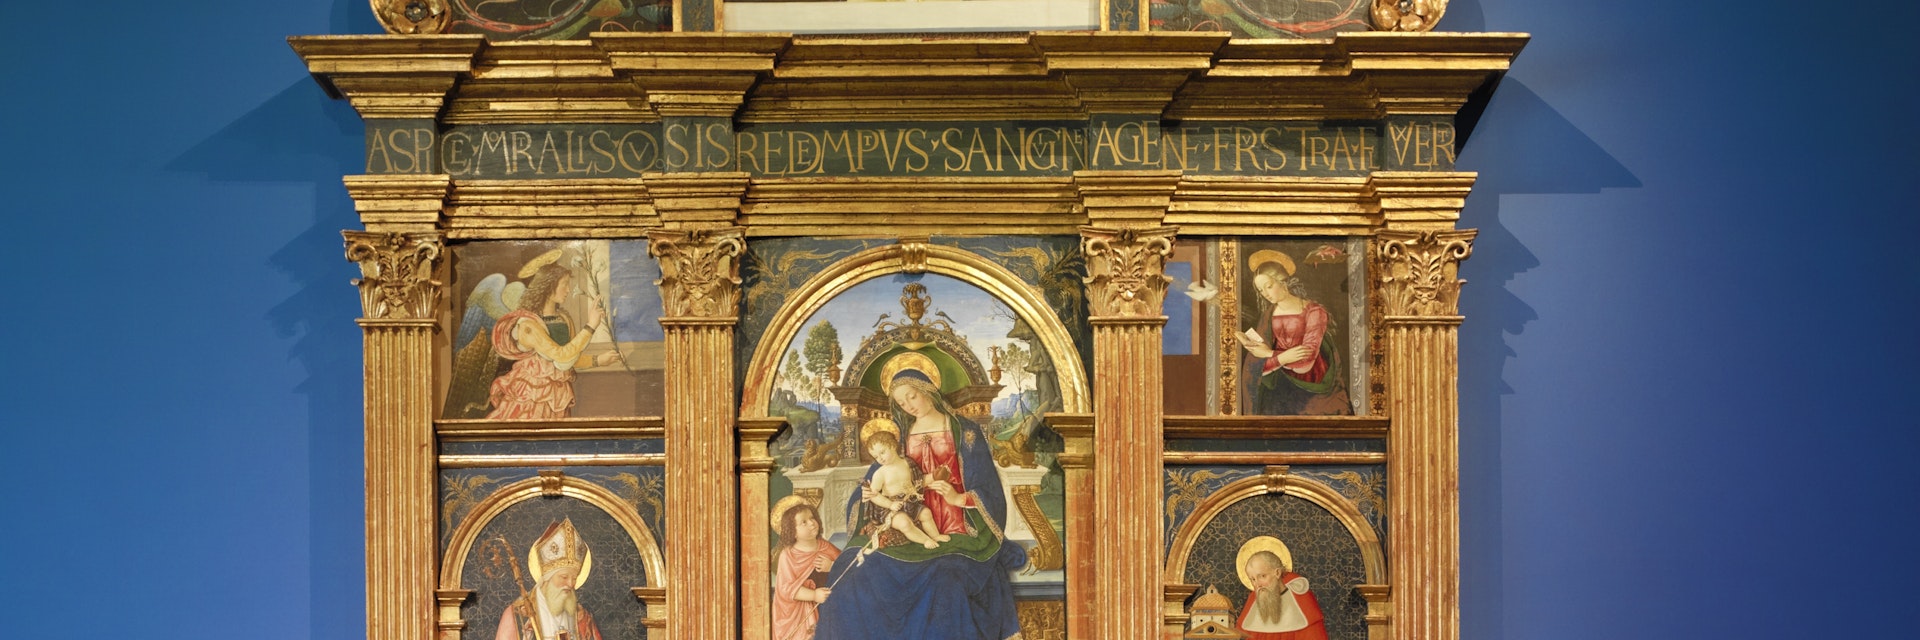 Tourist admire Pintoricchio's Pala di Santa Maria dei Fossi(1495)  in the National Gallery of Umbria.(Galleria Nazionale dell'Umbria). In the center of the multipaneled painting, the Madonna holds baby Jesus on her lap and a Pomergrante in the other hand.